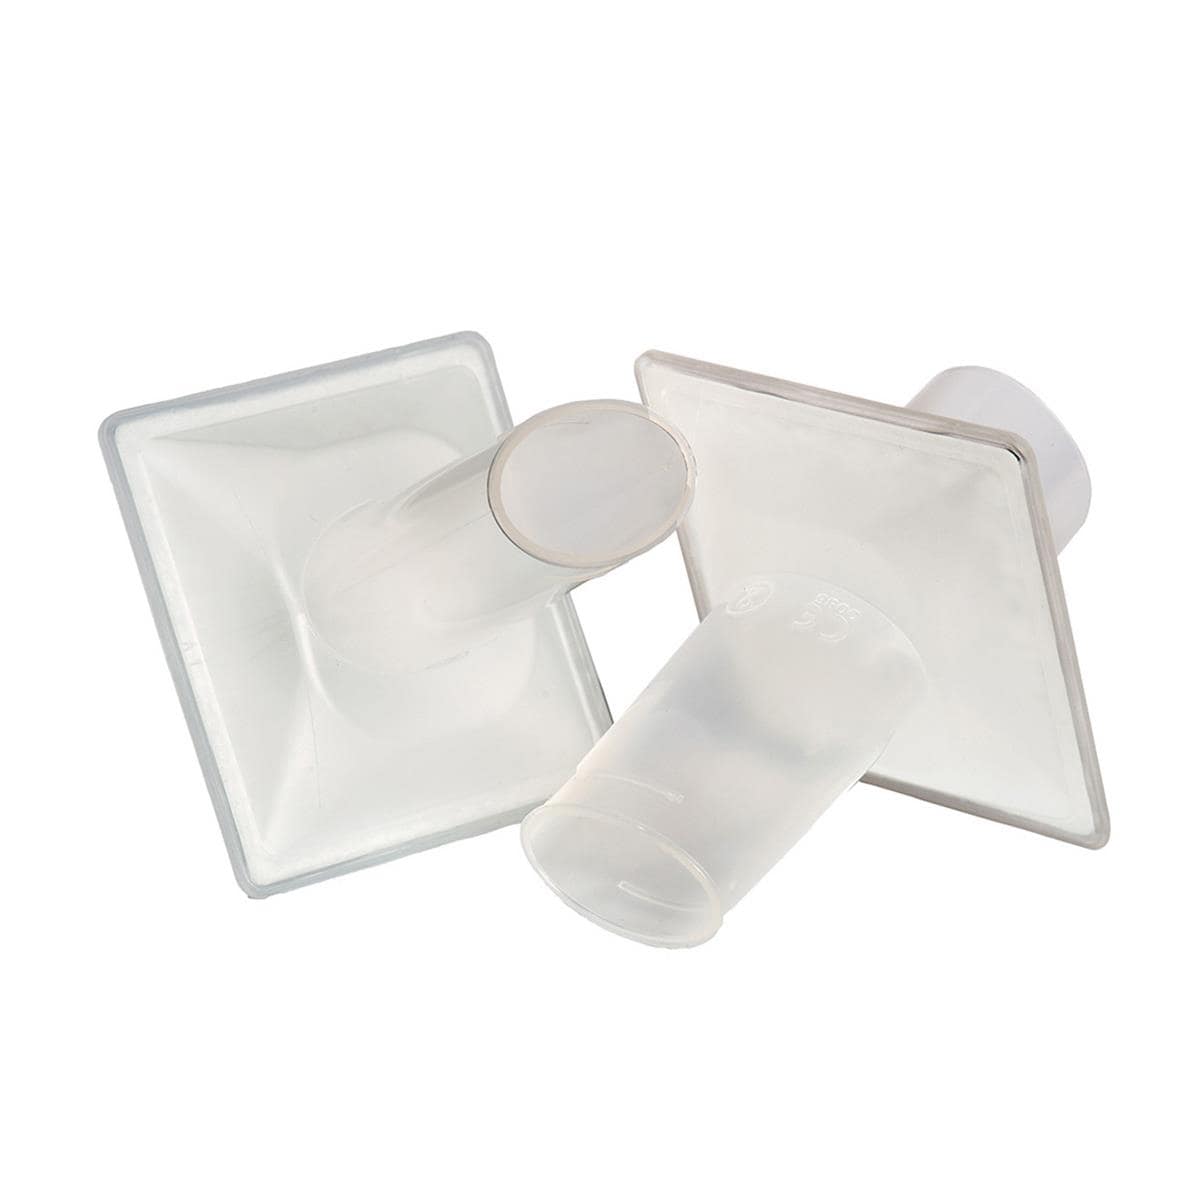 Eco BVF & Disposable Nose Clip 80pk for Office Spirometers